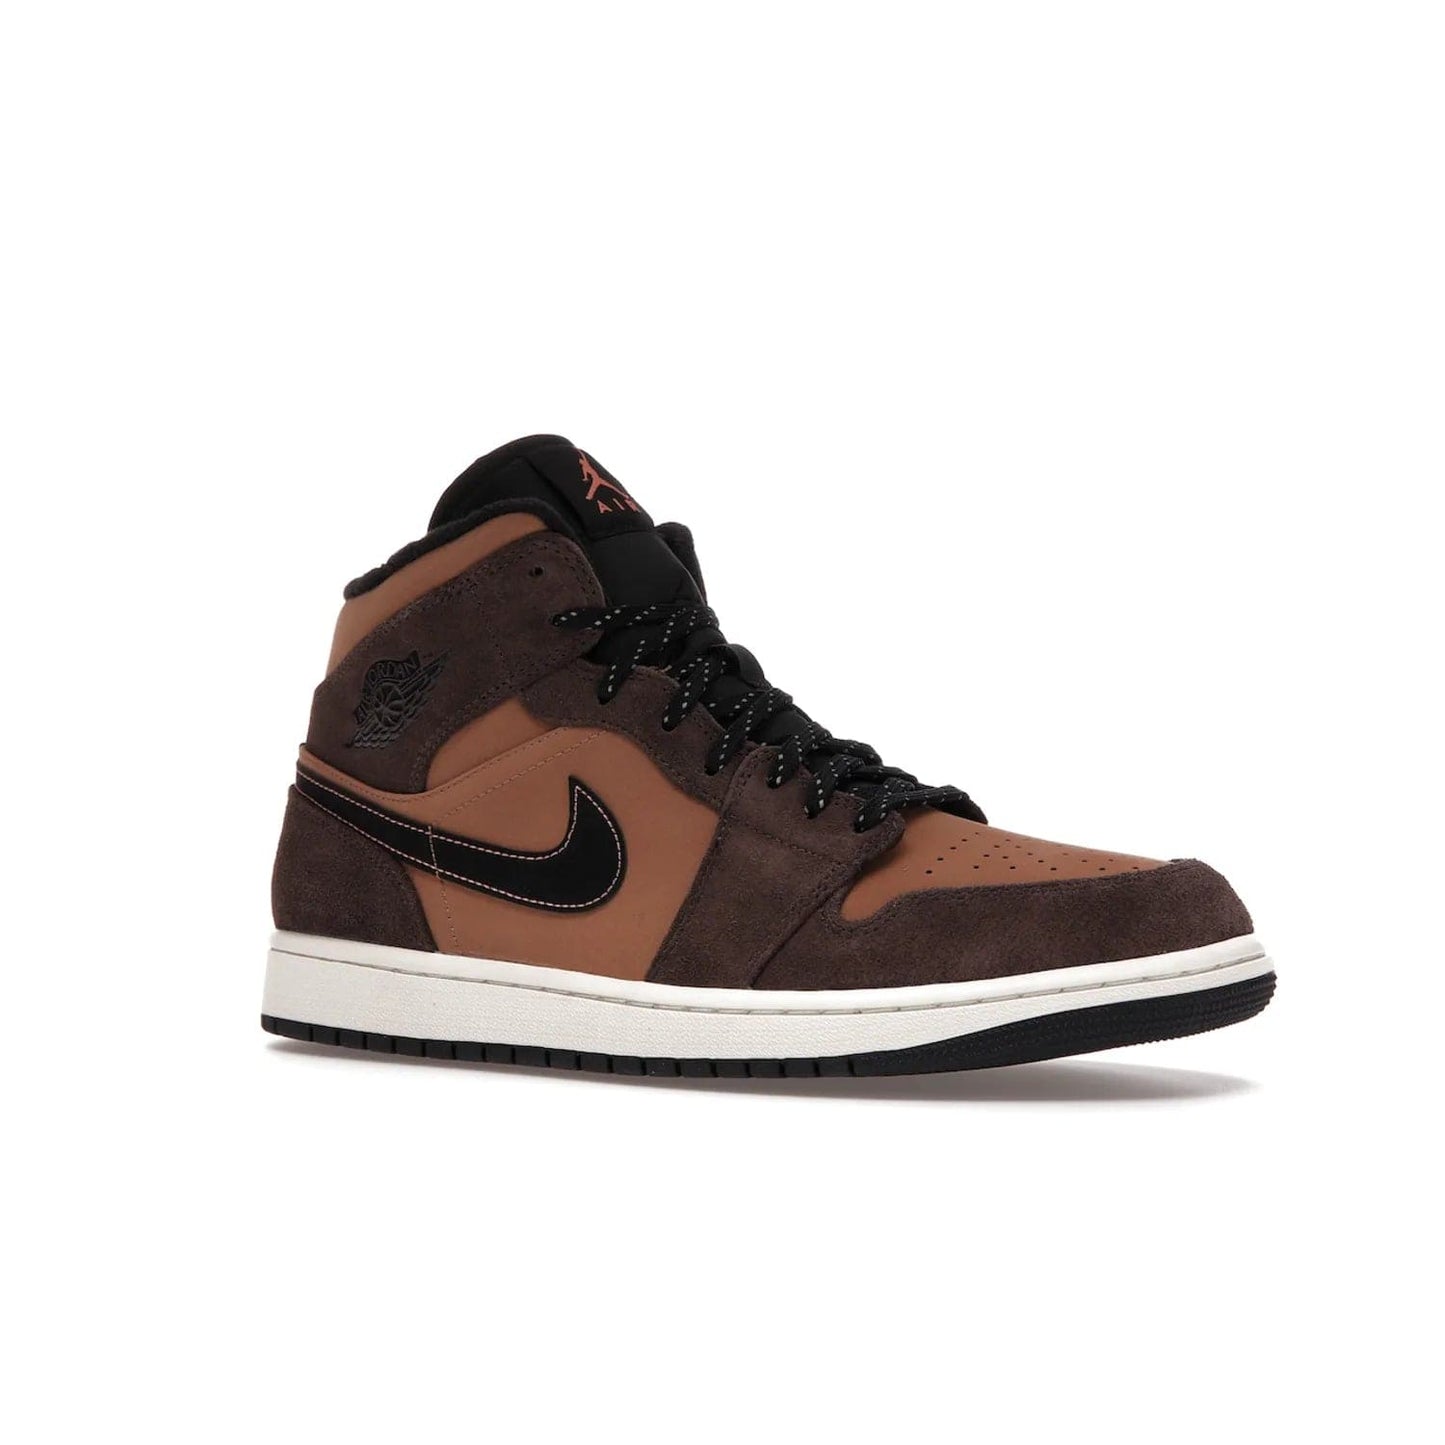 Jordan 1 Mid SE Dark Chocolate - Image 4 - Only at www.BallersClubKickz.com - This fashionable and functional Jordan 1 Mid SE Dark Chocolate features a light brown Durabuck upper, dark brown suede overlays, black Swoosh logos and reflective patch at heel. A must-have for any sneakerhead!